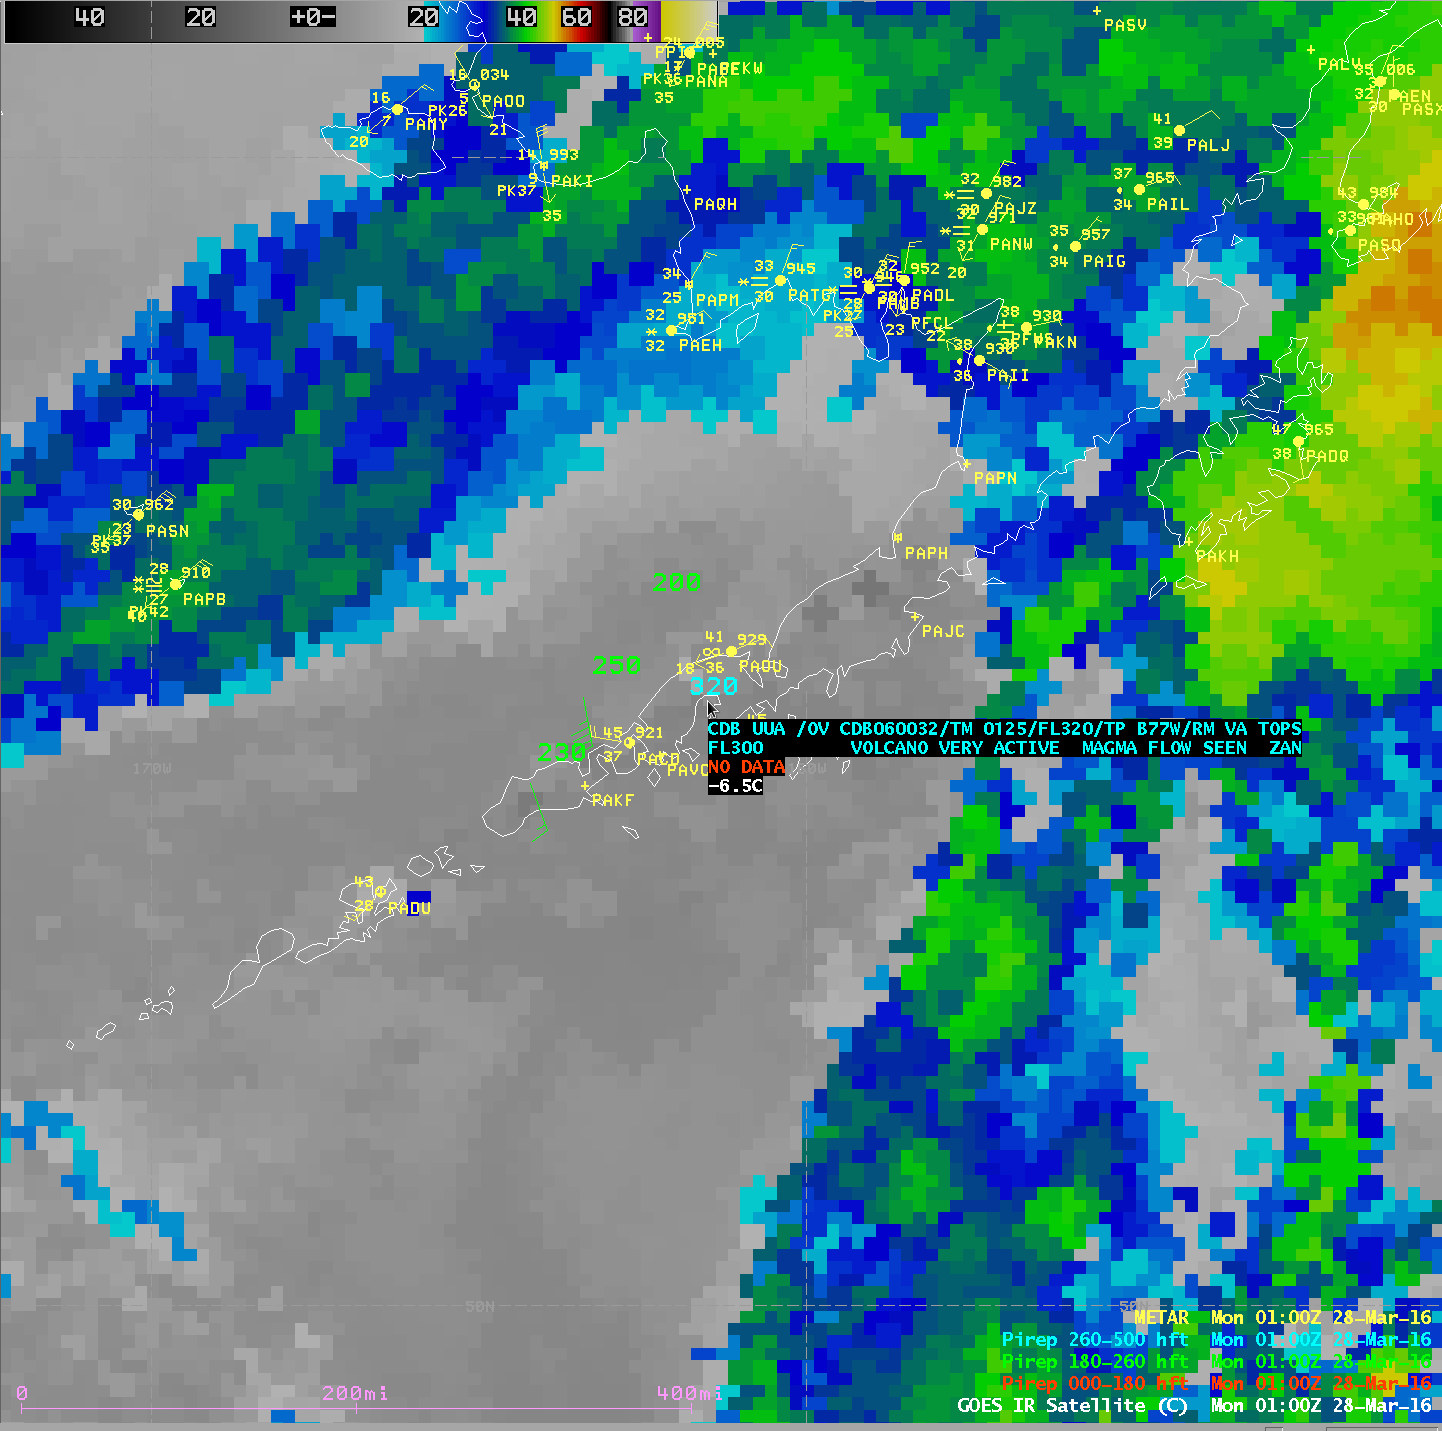 GOES-15 Infrared Window (10.7 um) image, with METAR surface reports and Pilot reports [click to enlarge]